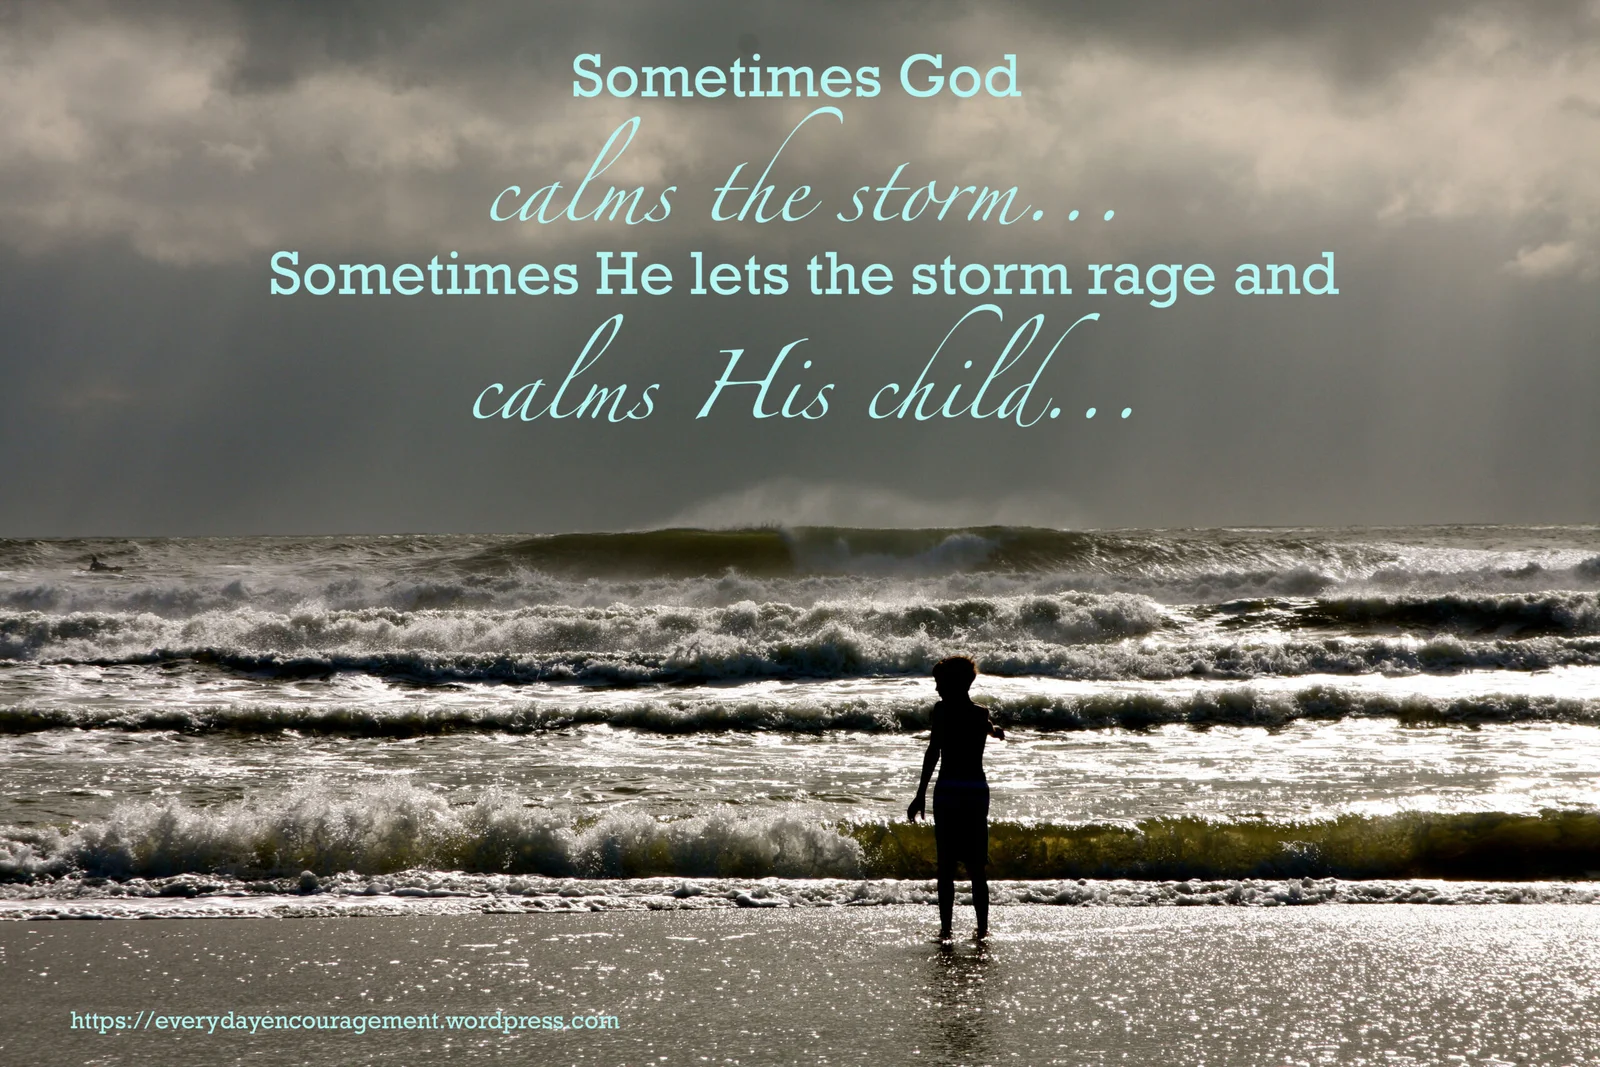 Facing Lifes Storms With Faith And Courage.